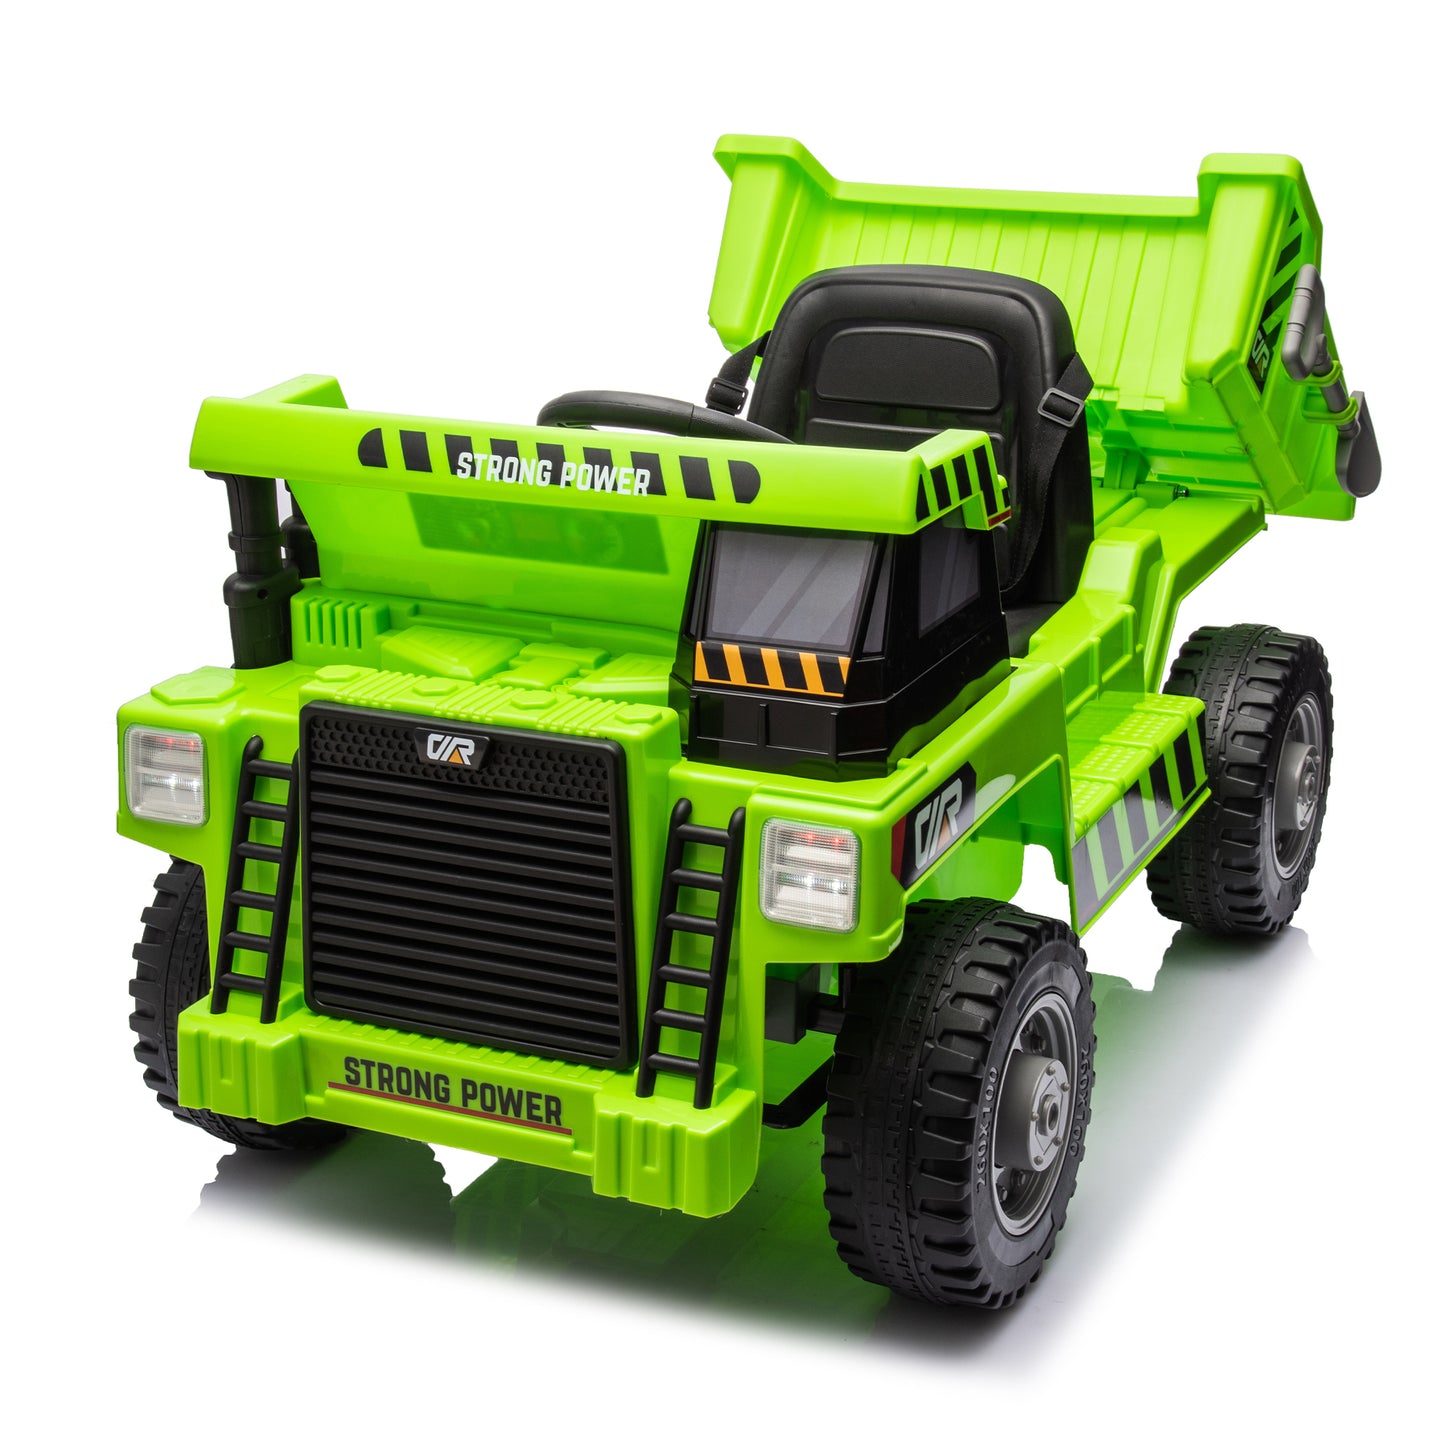 Dump Truck Adventure Ride-On Toy with Parental Control, Electric Dump Bed, Phone Stand, and MP3 Player